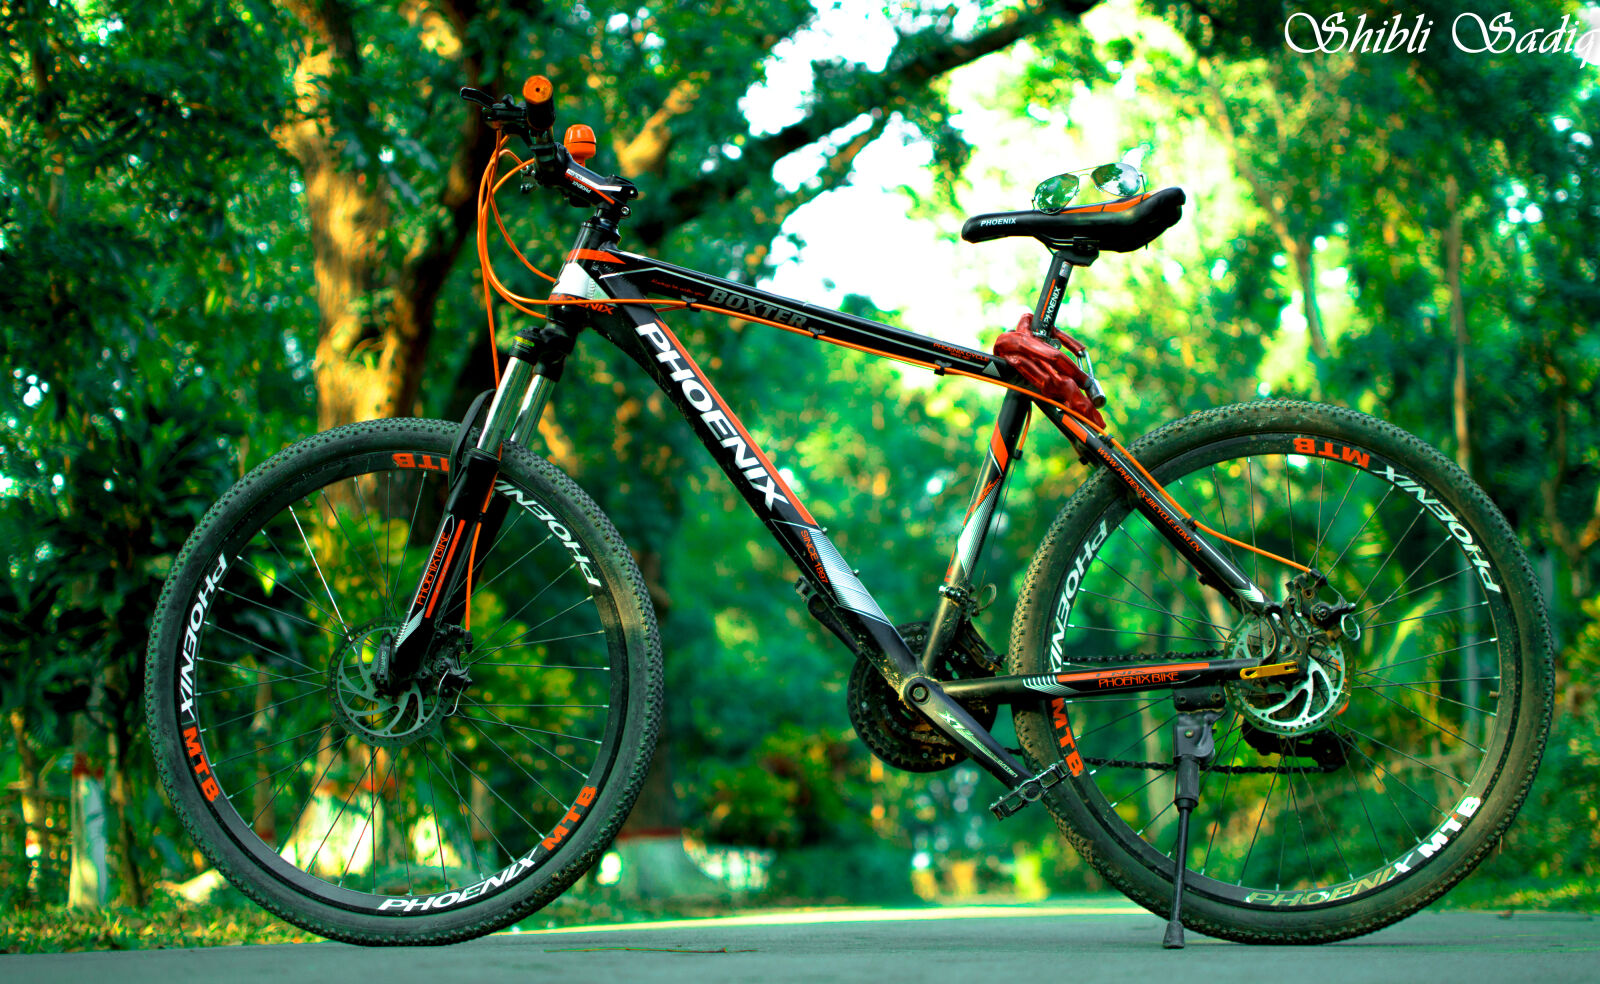 Nikon D3200 sample photo. Beauty, bicycle, bicycle, frame photography